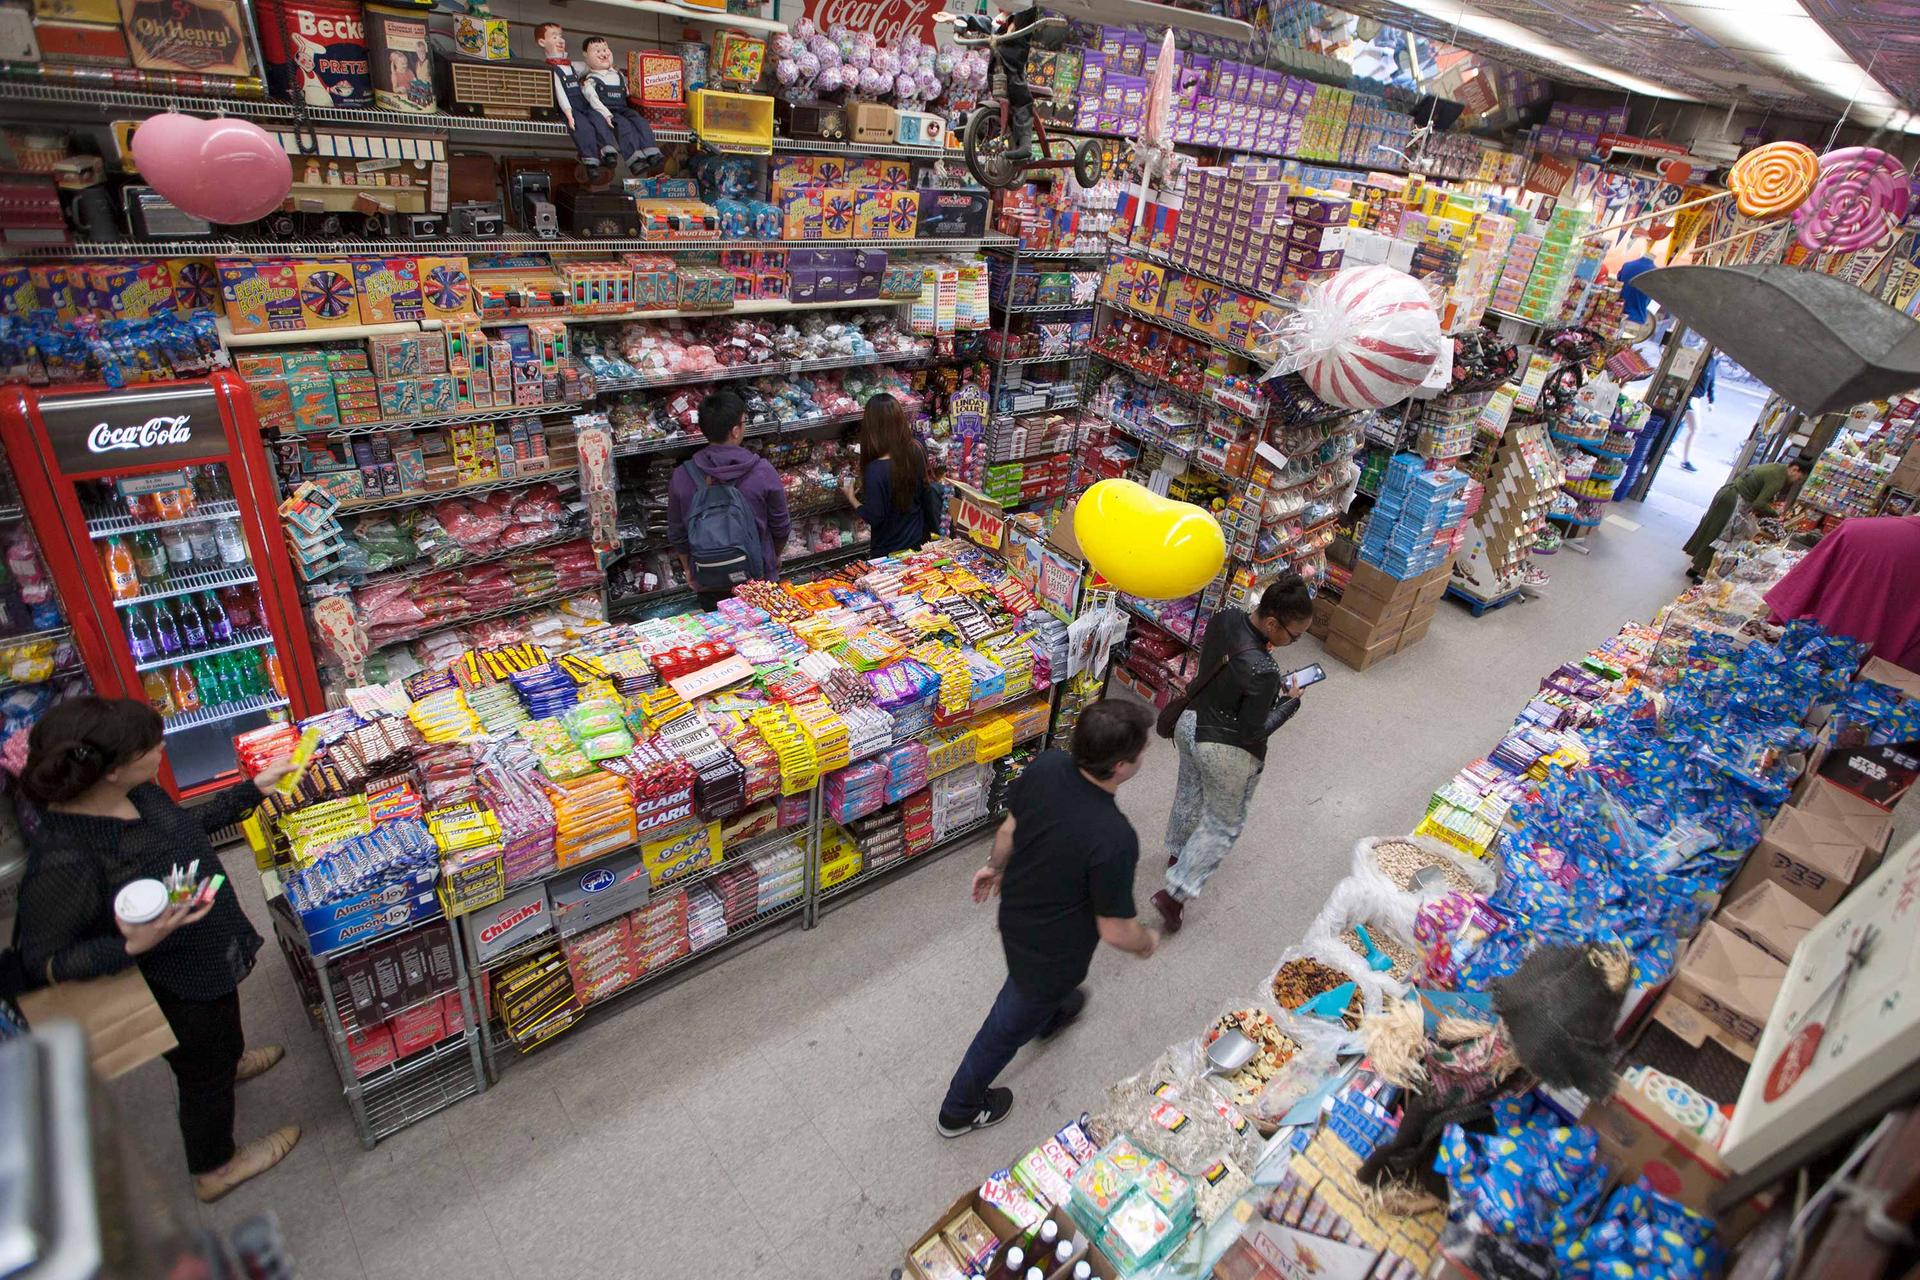 Interior of Economy Candy store in Manhattan, NYC